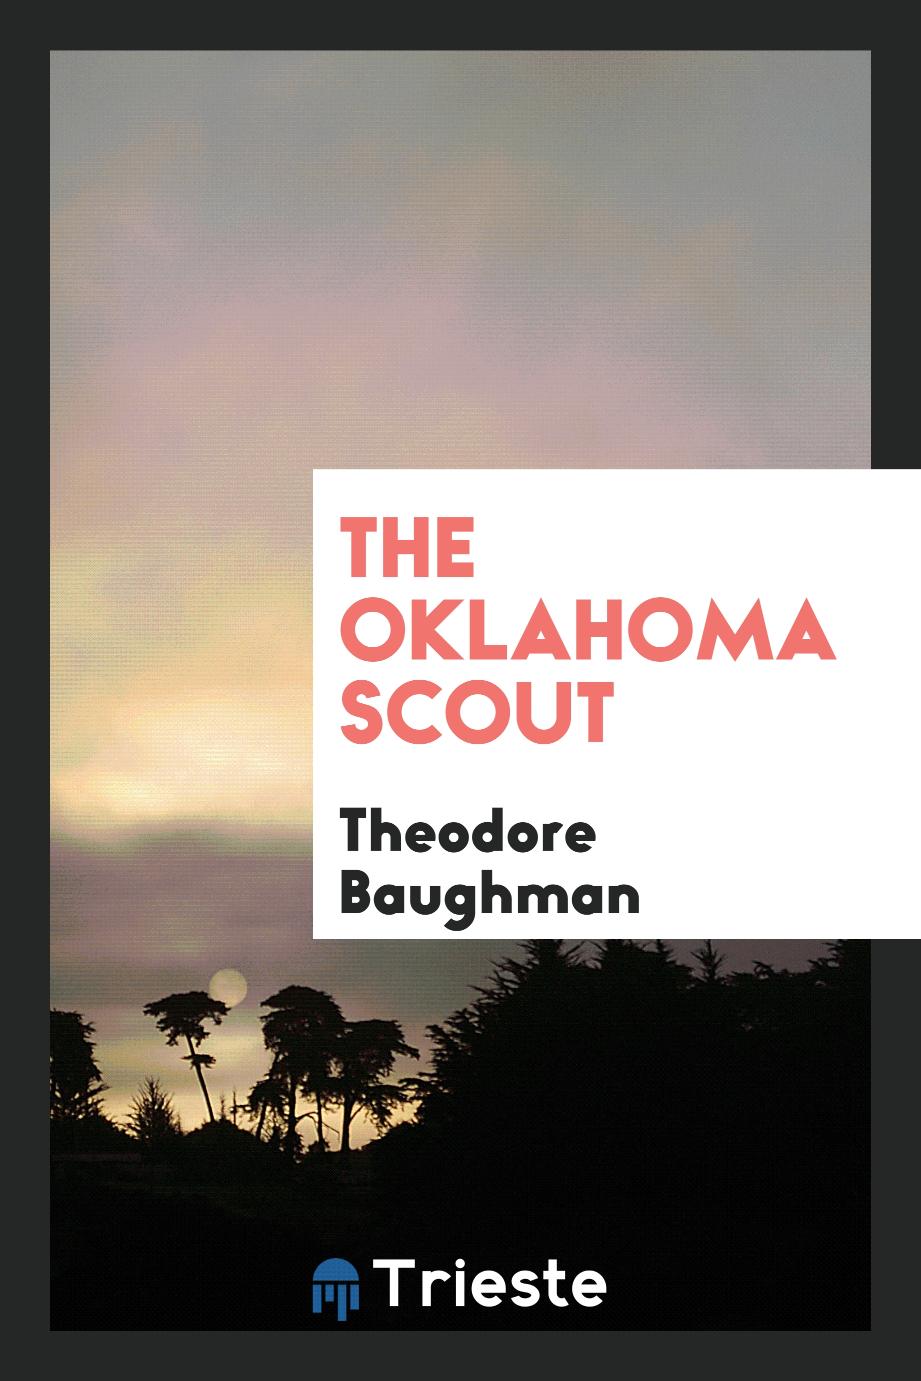 The Oklahoma scout